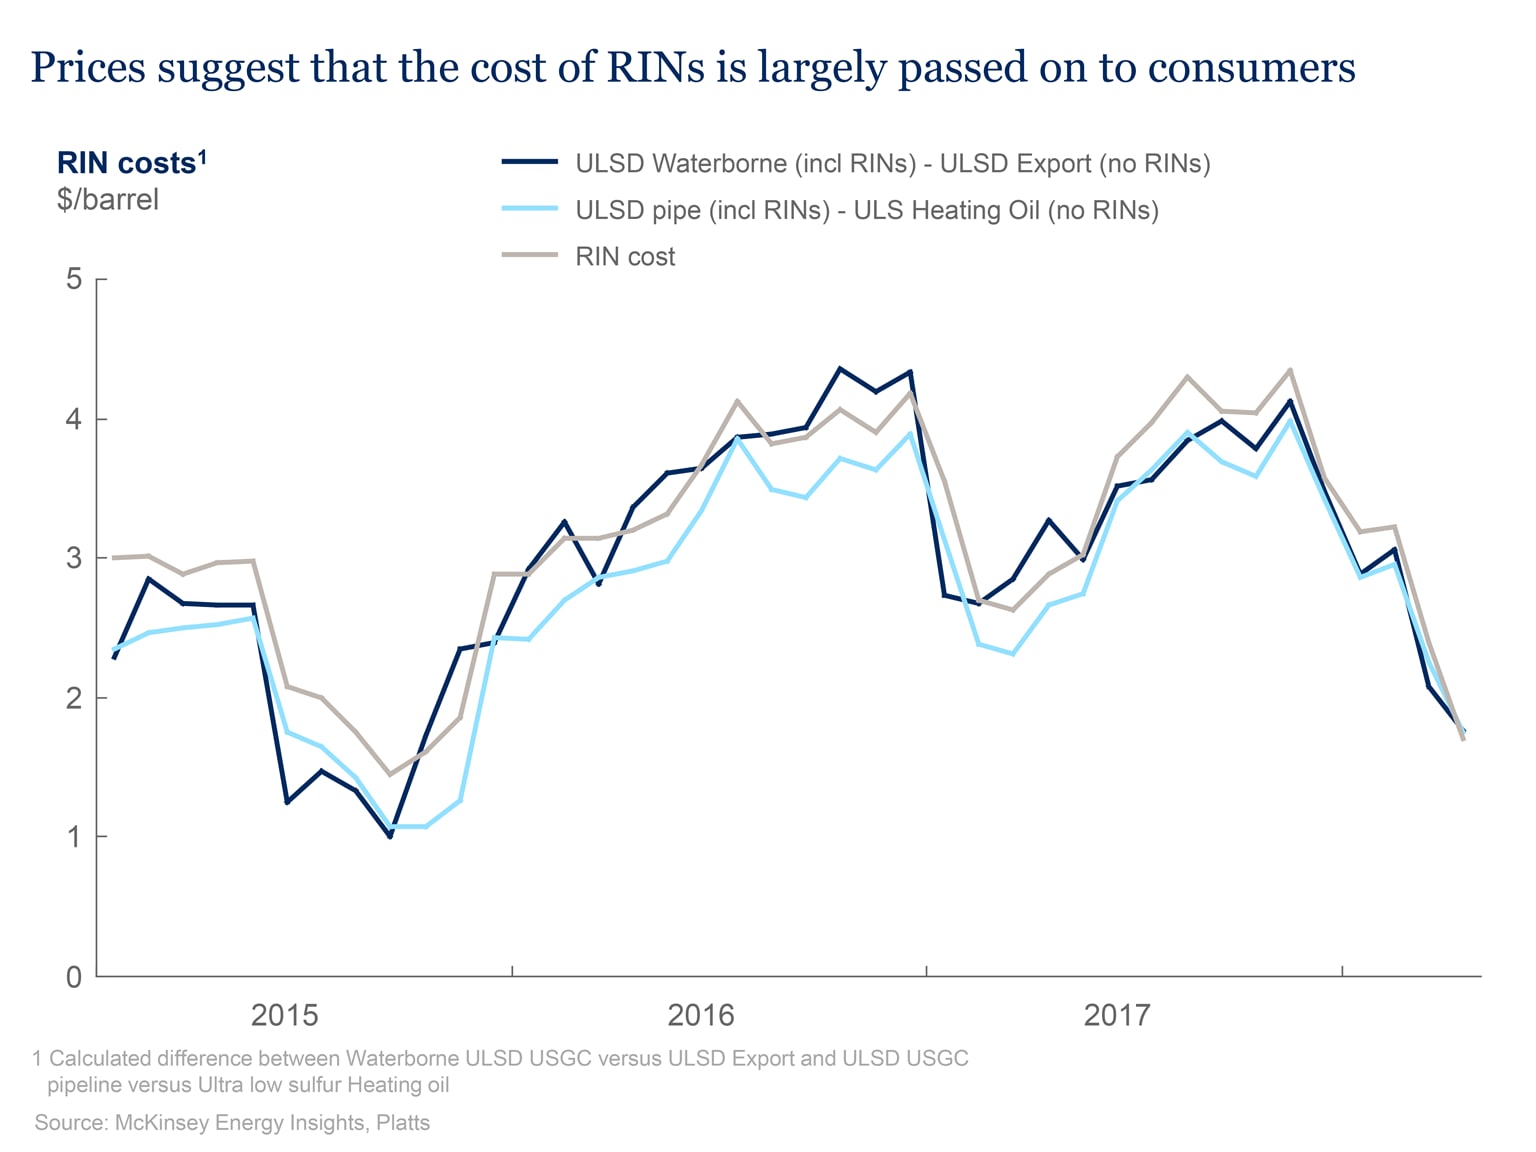 Prices suggest that the cost of RINs is largely passed on to consumers